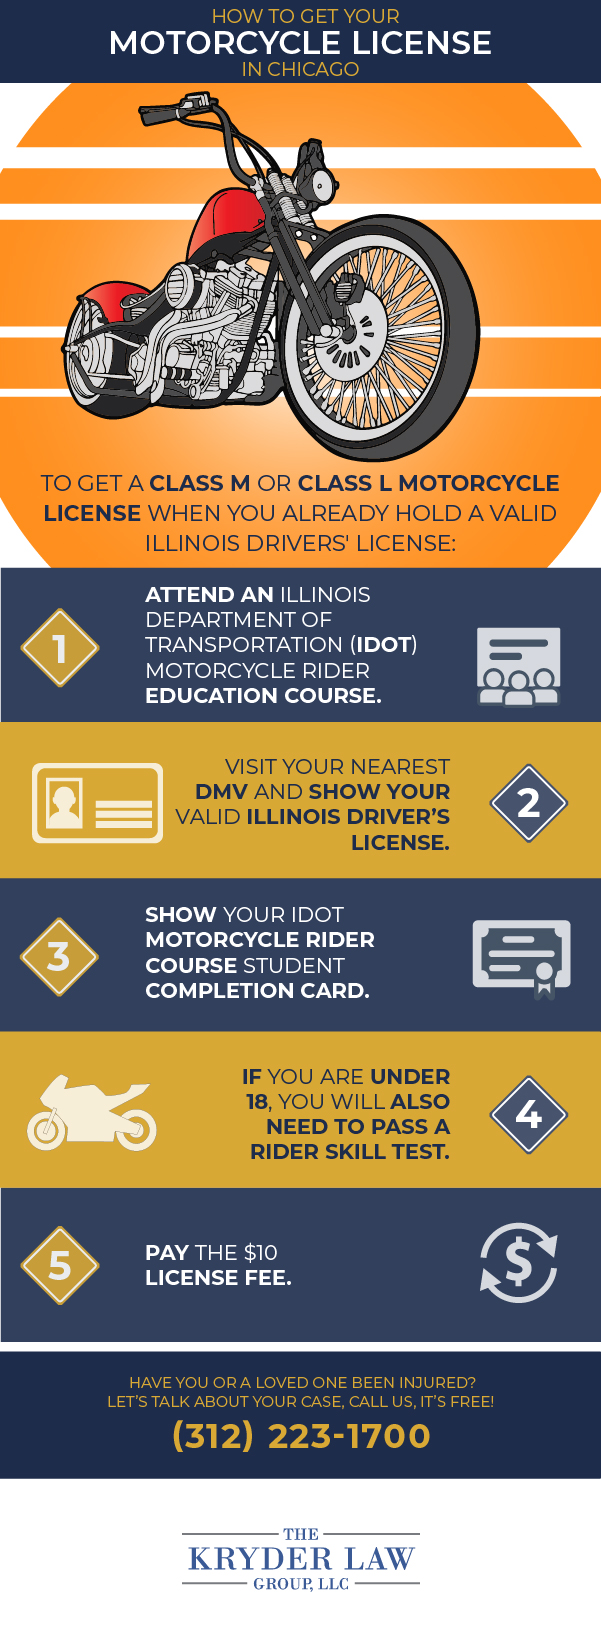 How to Get a Motorcycle License in Chicago Infographic